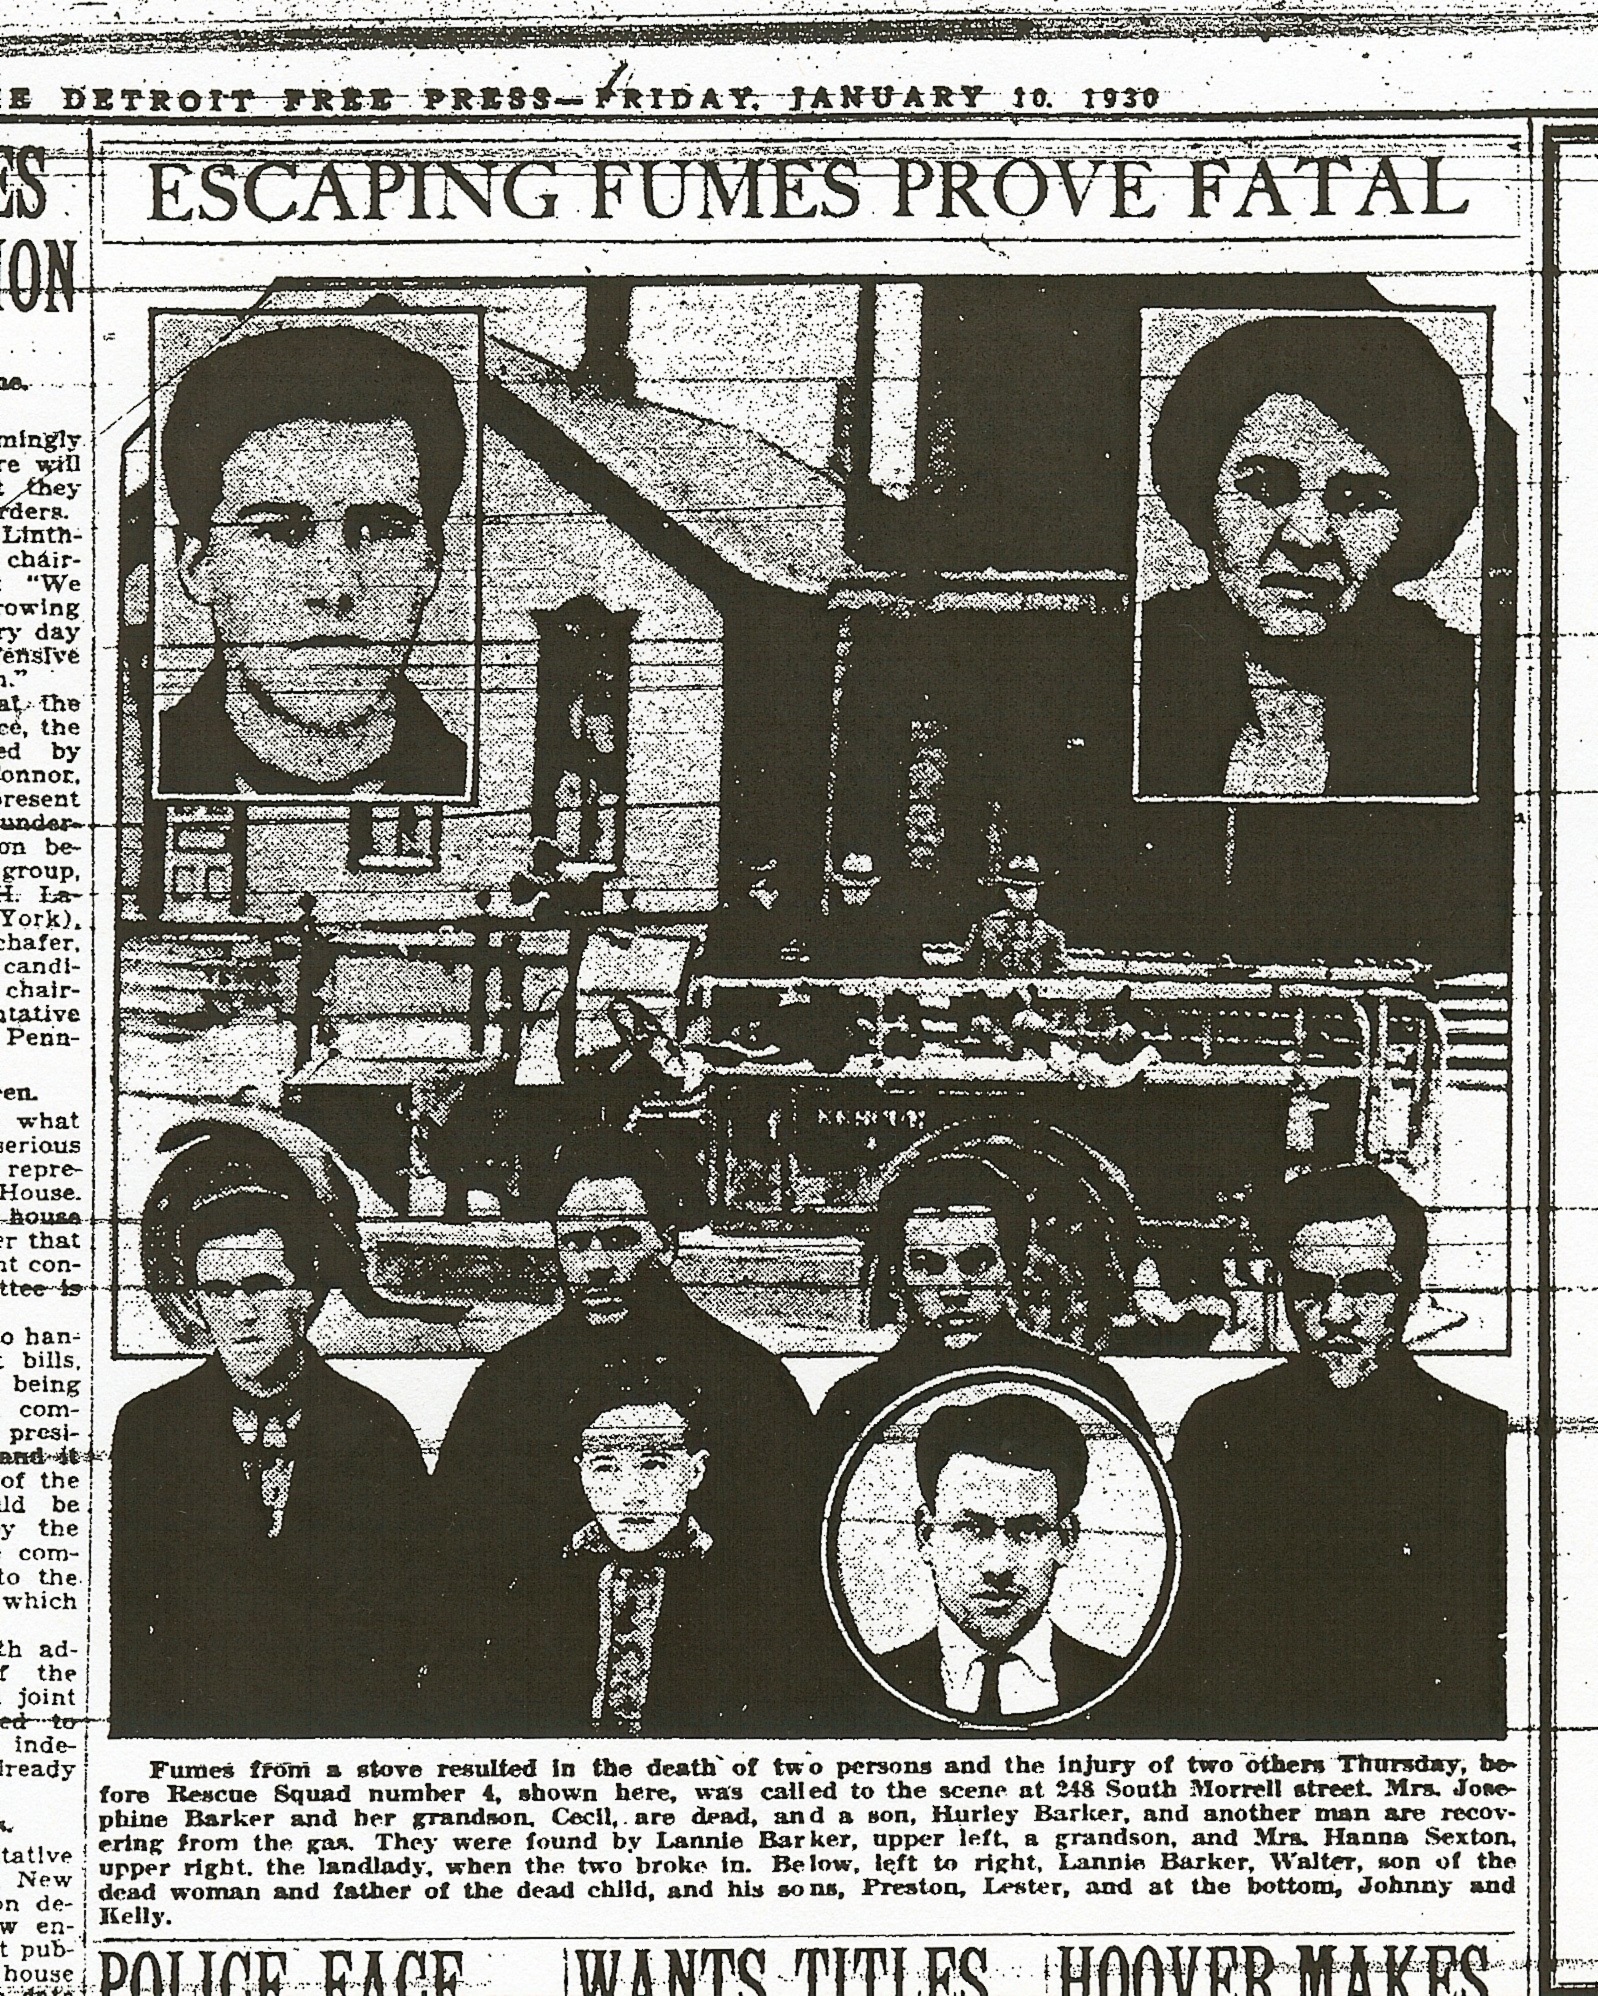 The Barker Tragedy in Michigan, Detroit Free Press 10 Jan 1930 page 3